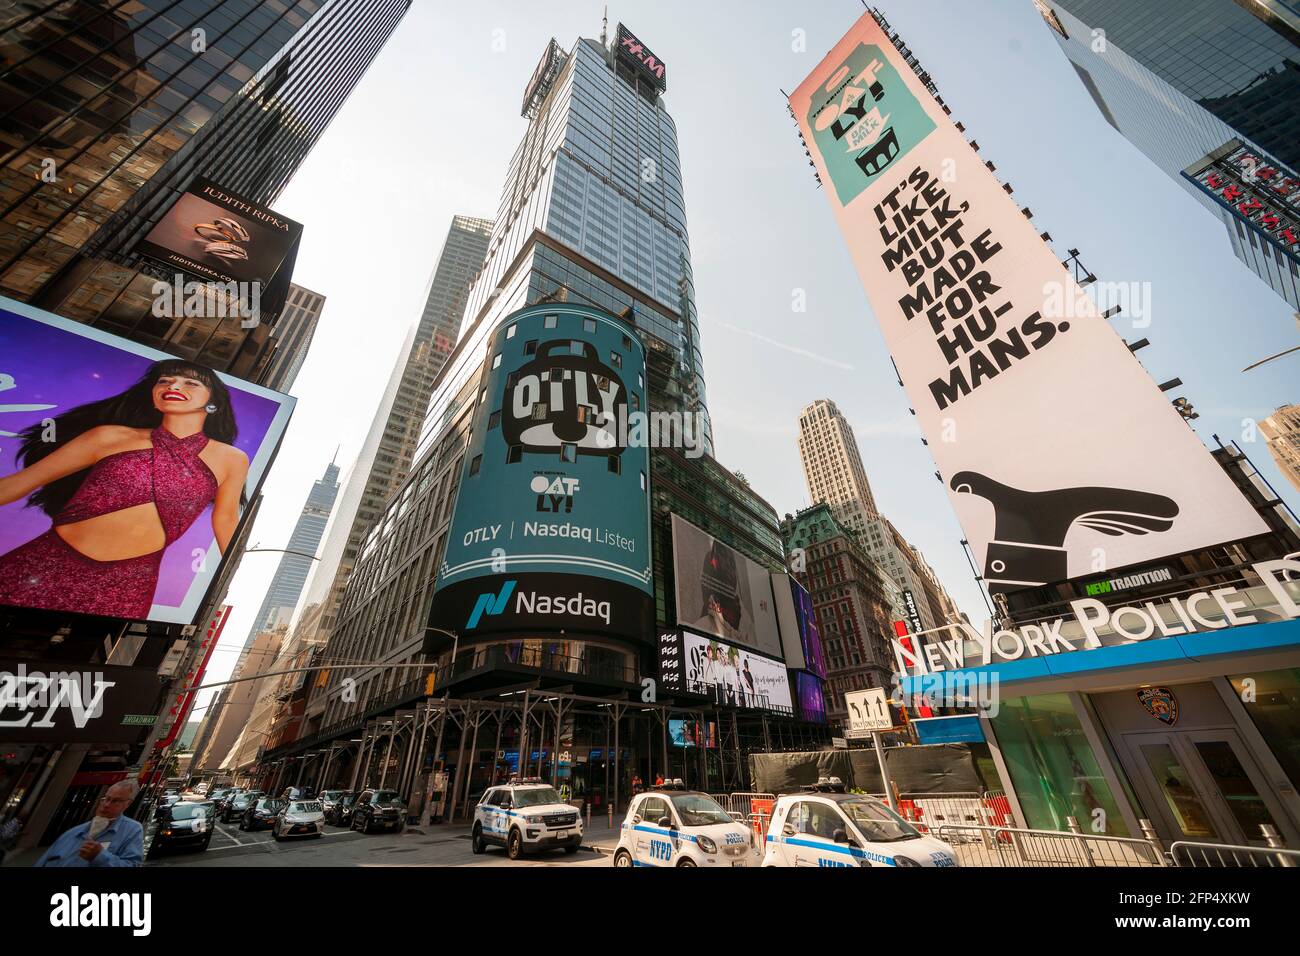 New York, USA. 20th May, 2021. The Nasdaq stock exchange and surrounding  billboards are decorated for the initial public offering of the Oatly brand  oat-milk in Times Square in New York on